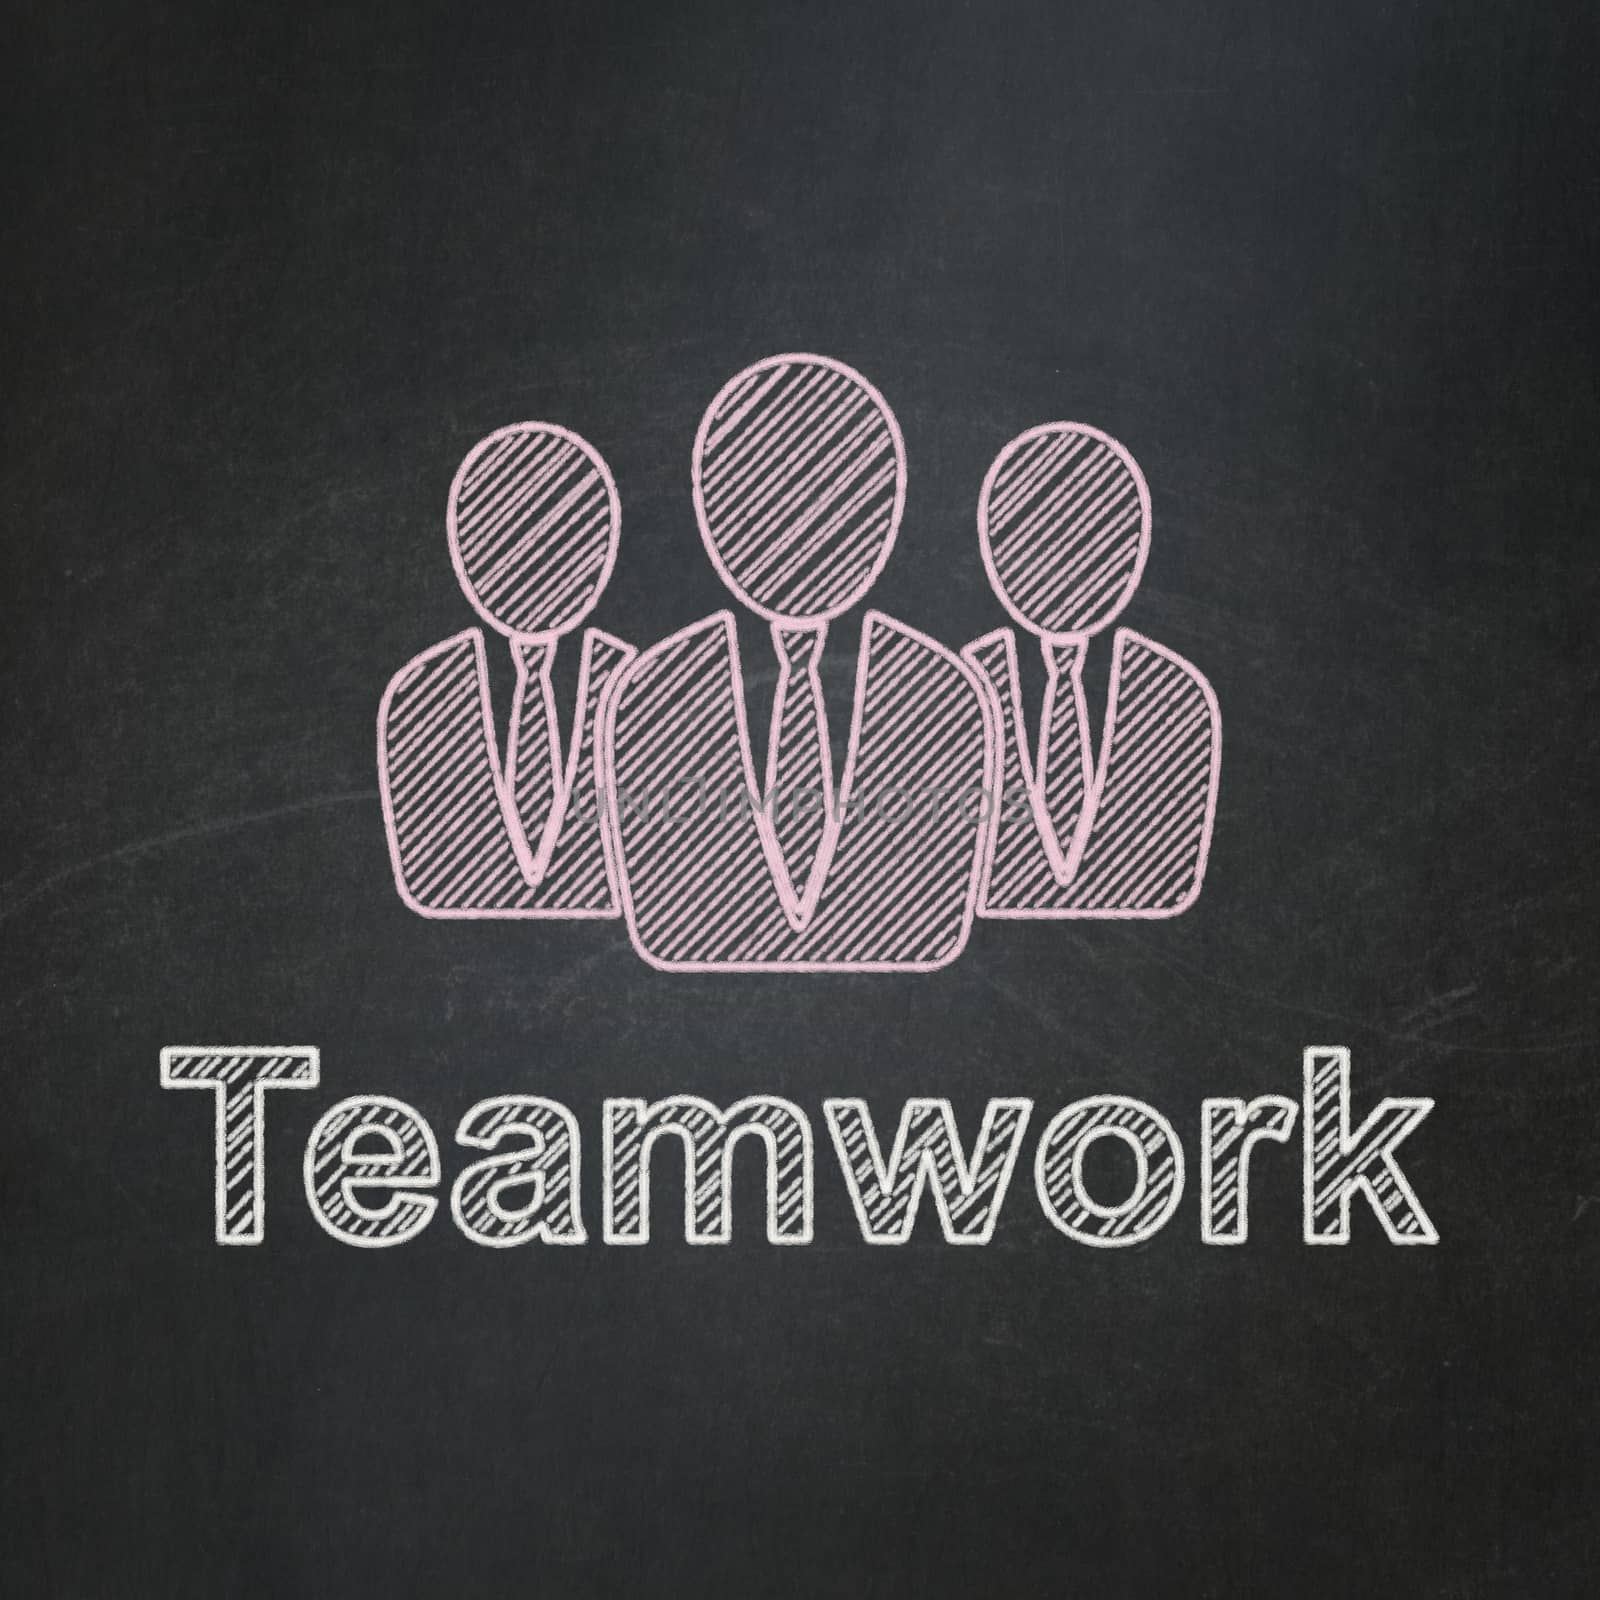 Business concept: Business People icon and text Teamwork on Black chalkboard background, 3d render